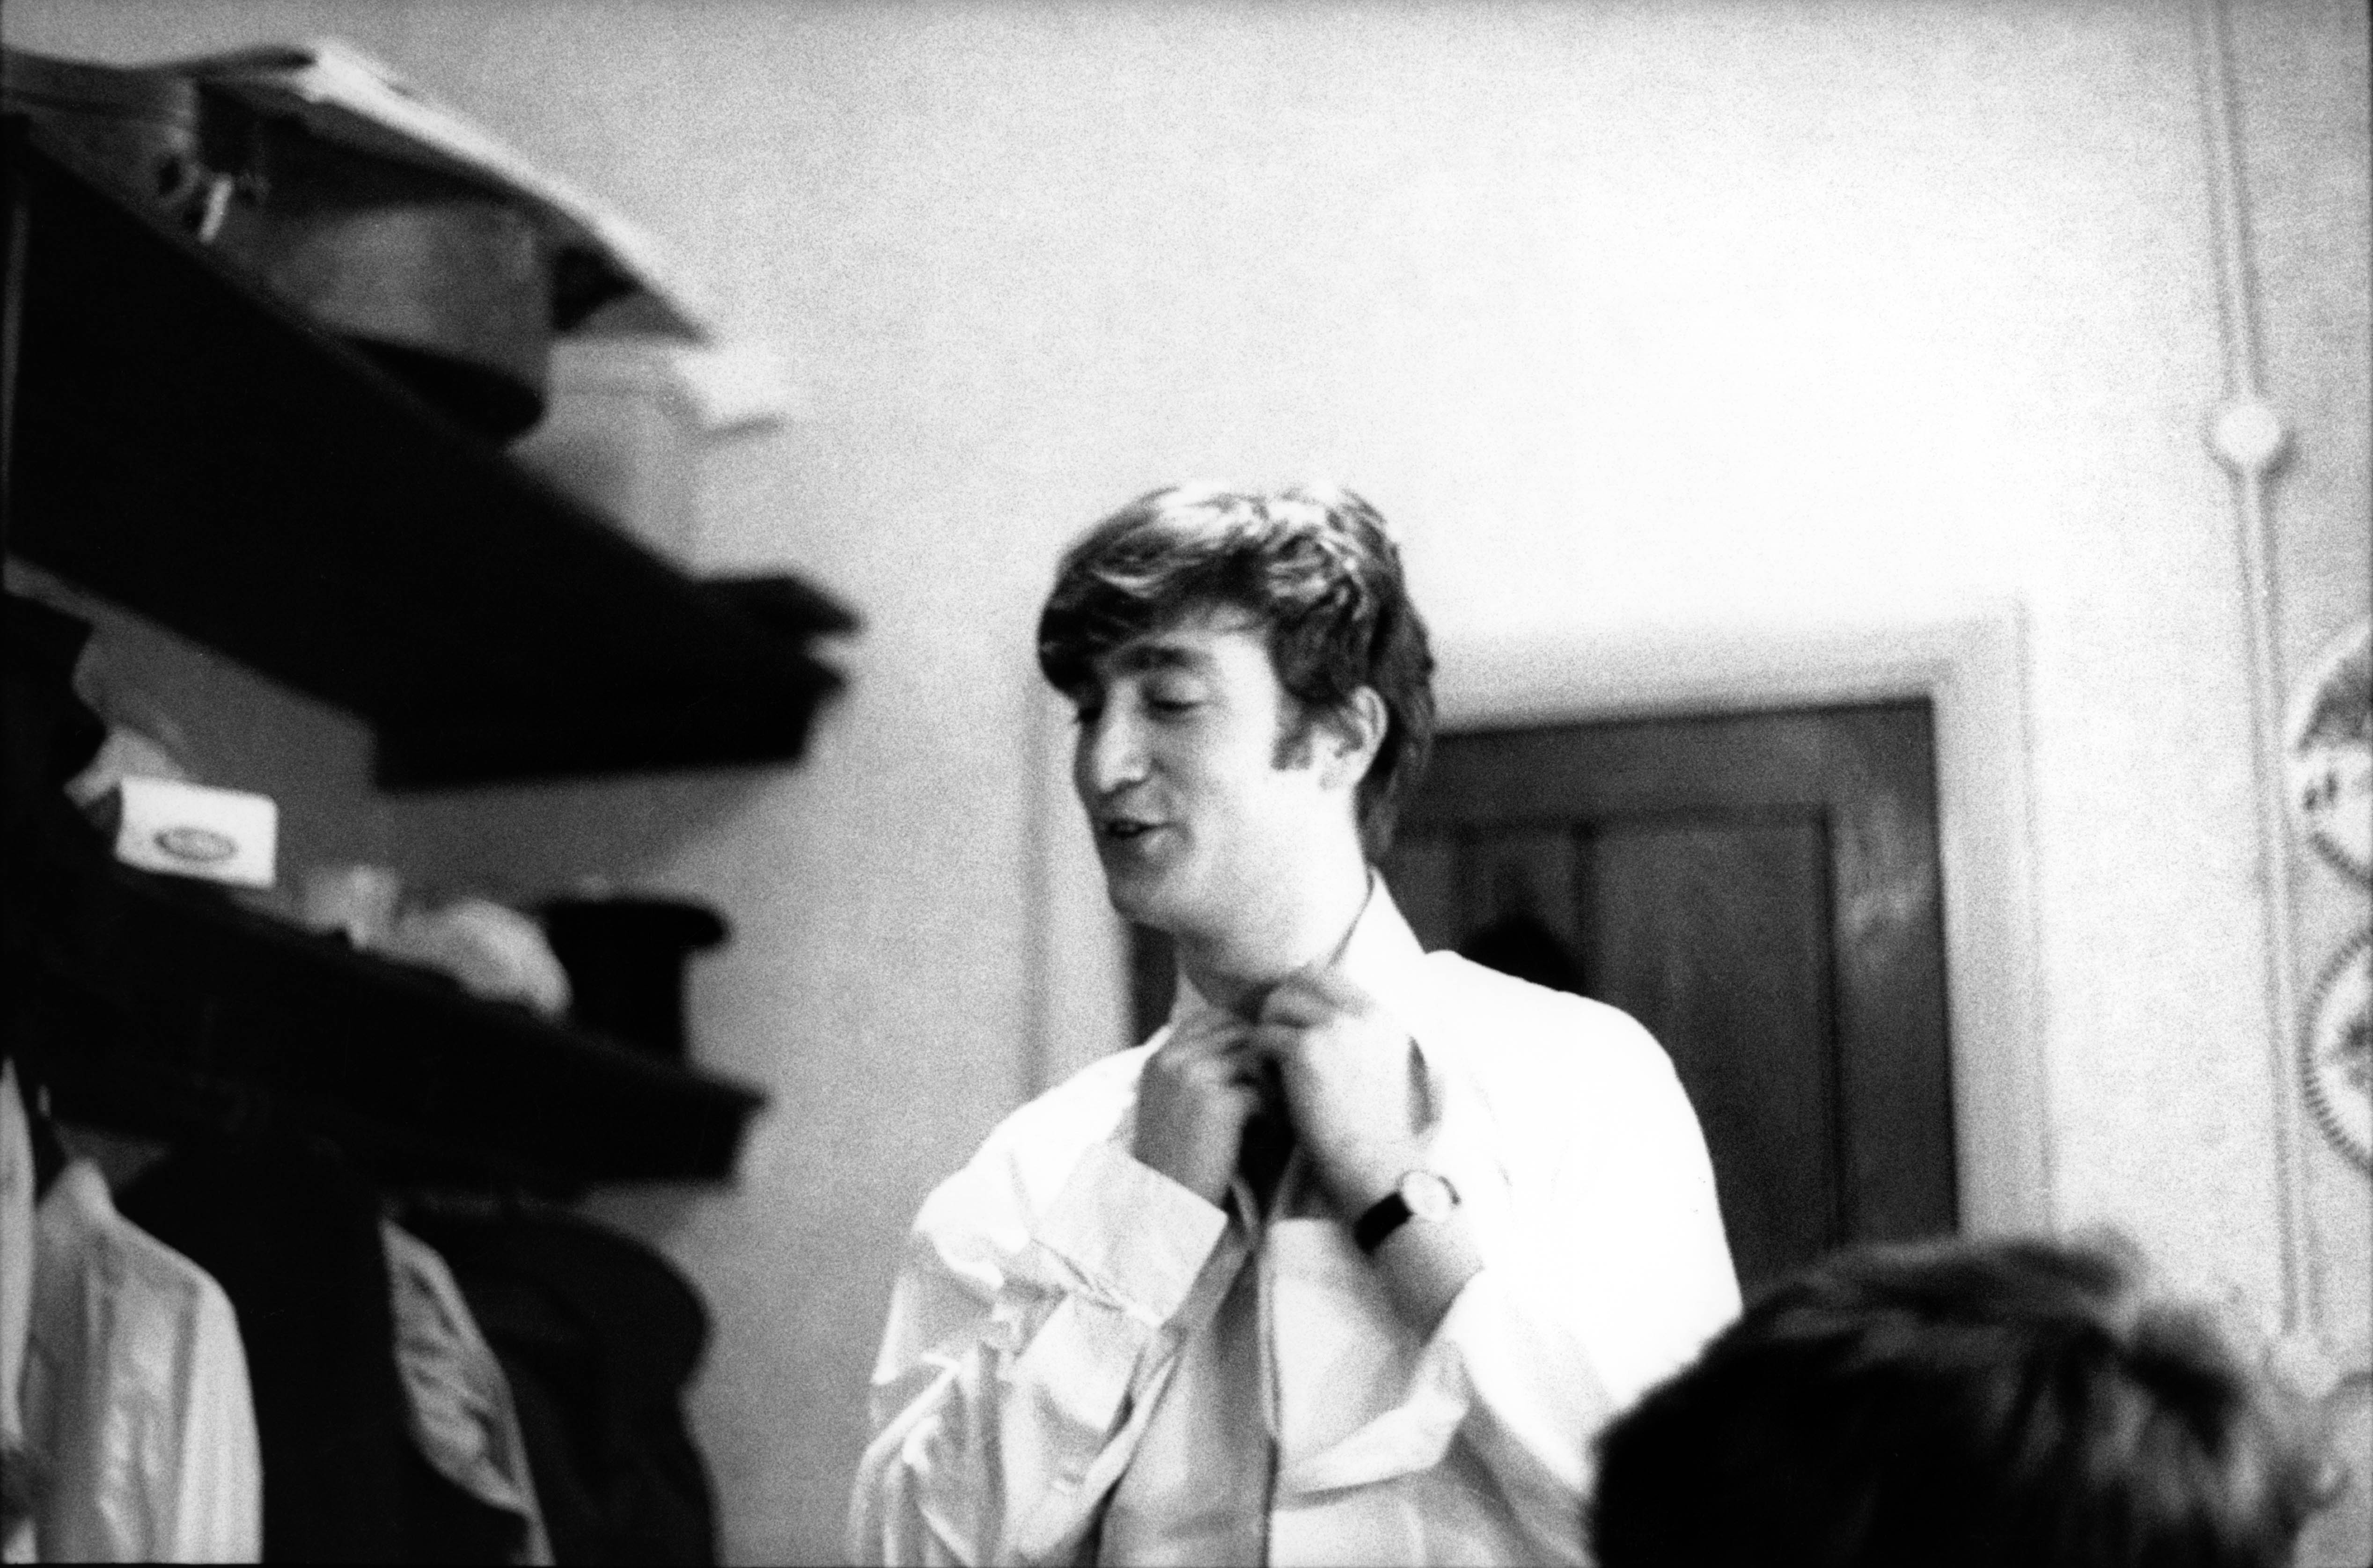 John Lennon (1940-1980) from The Beatles posed backstage at the Finsbury Park